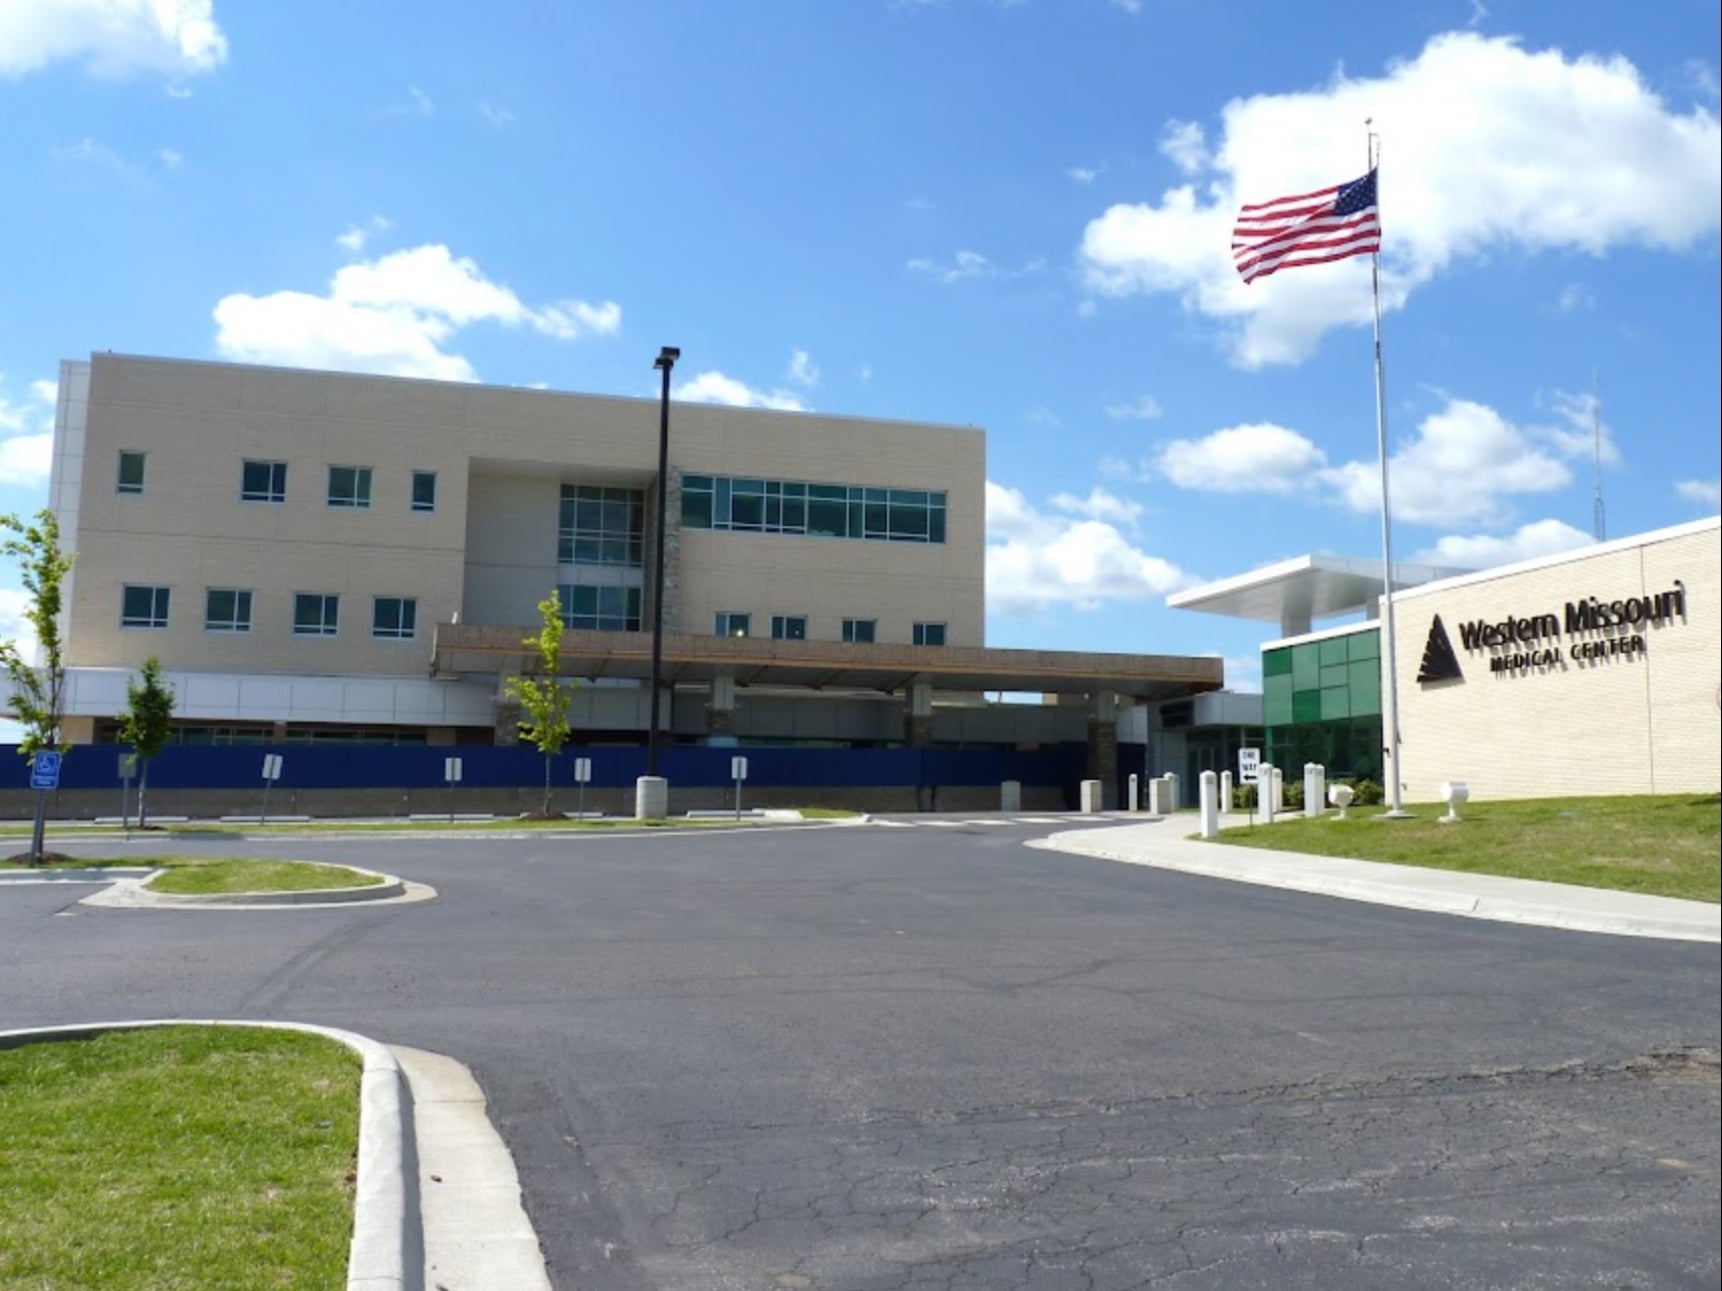 Western Missouri Medical Centre in Warrensburg, Missouri. Hospital officials said an armed individual entered the facilities, which prompted an investigation by local police.